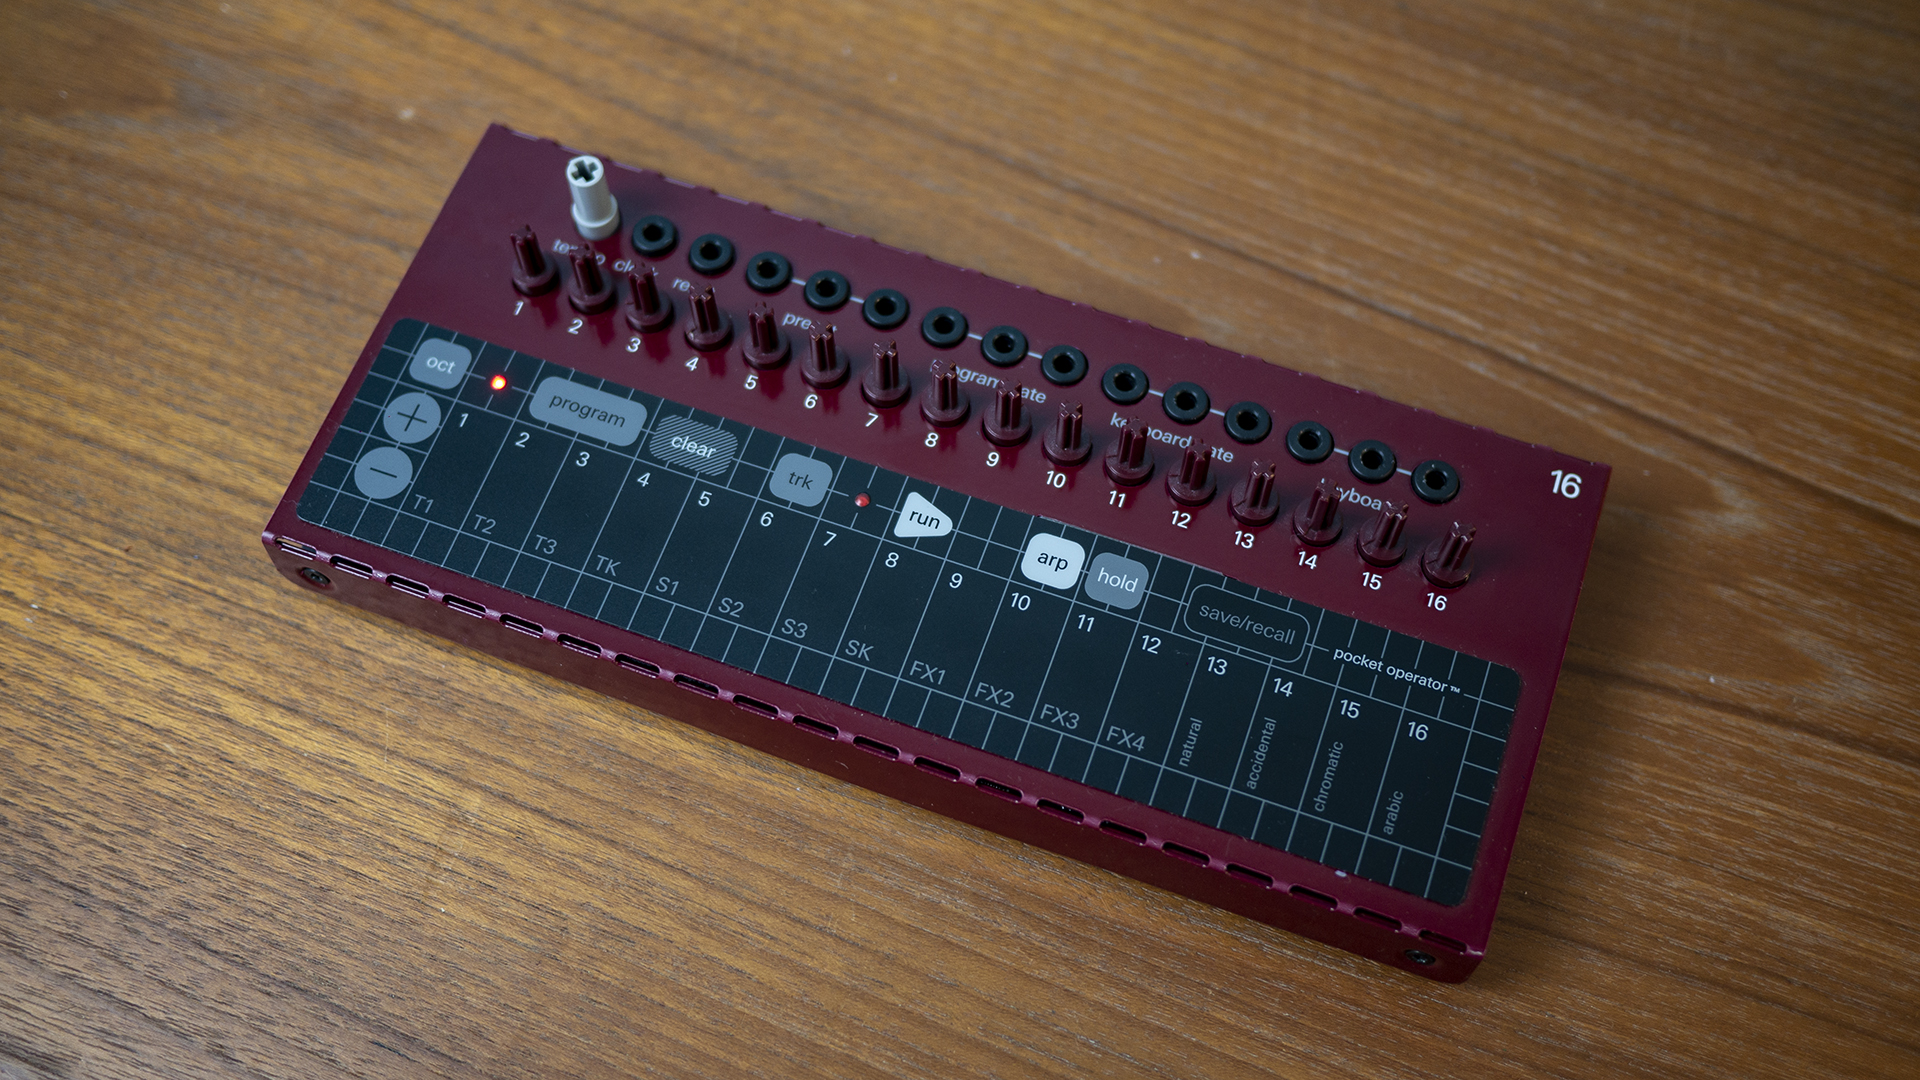 Our Guide to the Teenage Engineering Pocket Operator Modular